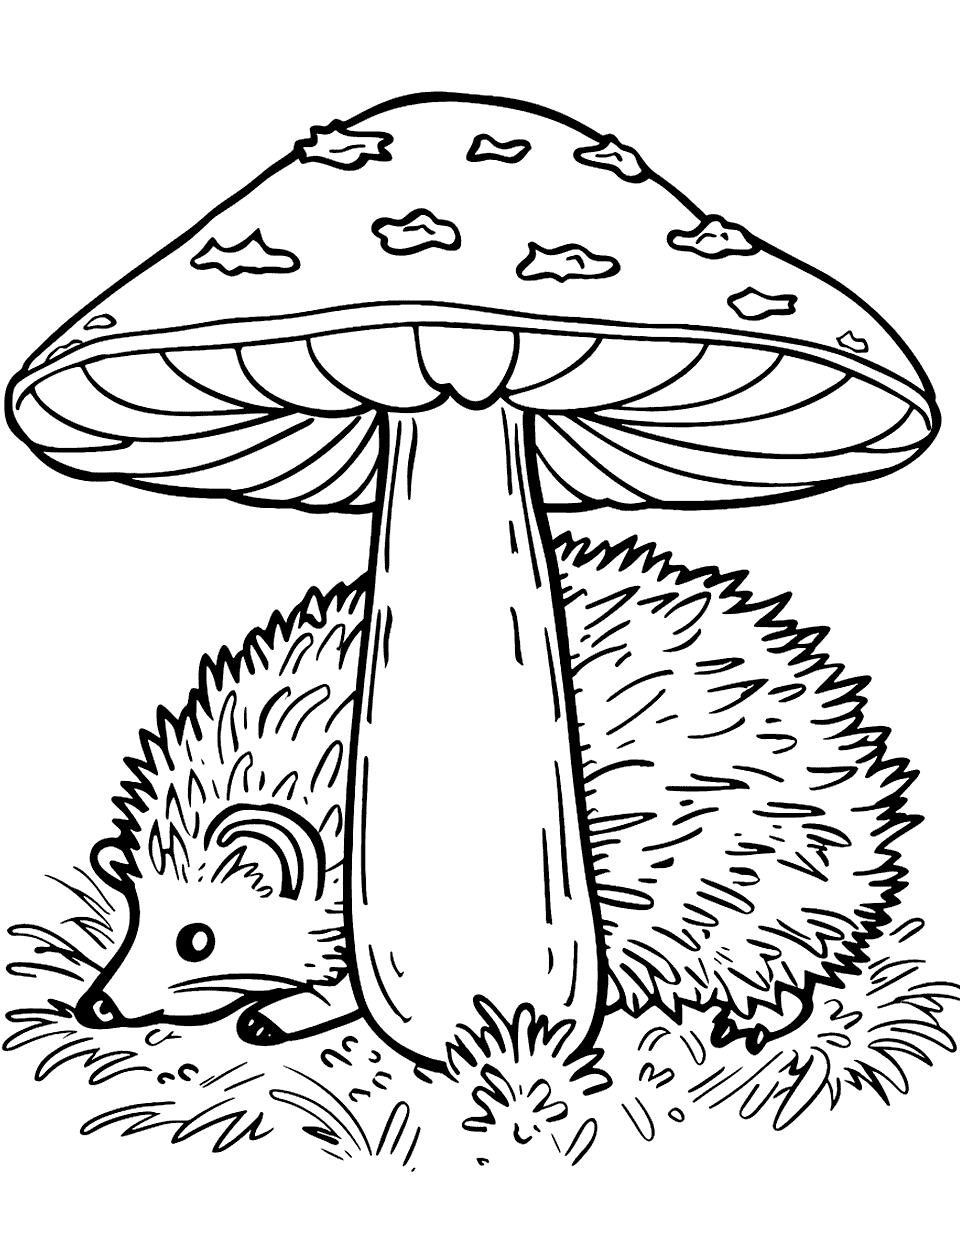 Hedgehog by a Mushroom Coloring Page - A hedgehog curls up next to a mushroom for shelter.